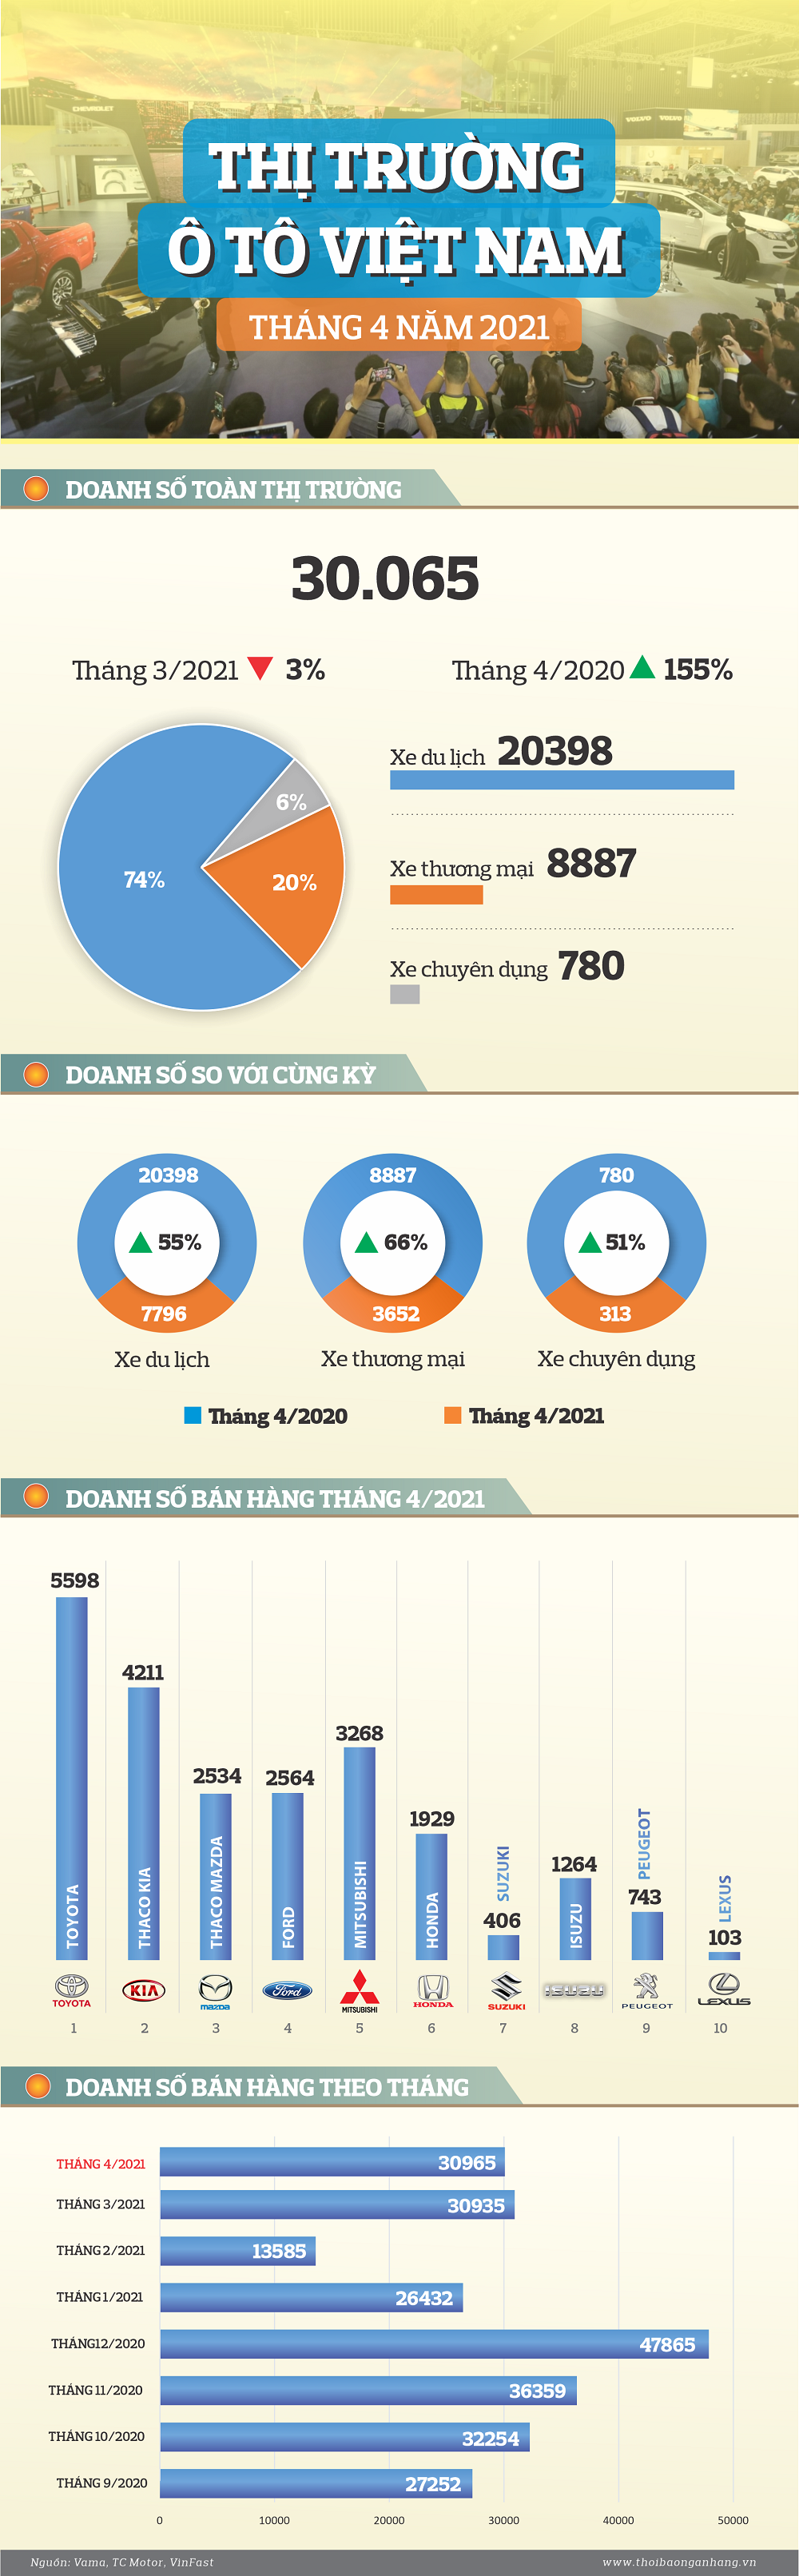 infographic thi truong o to thang 42021